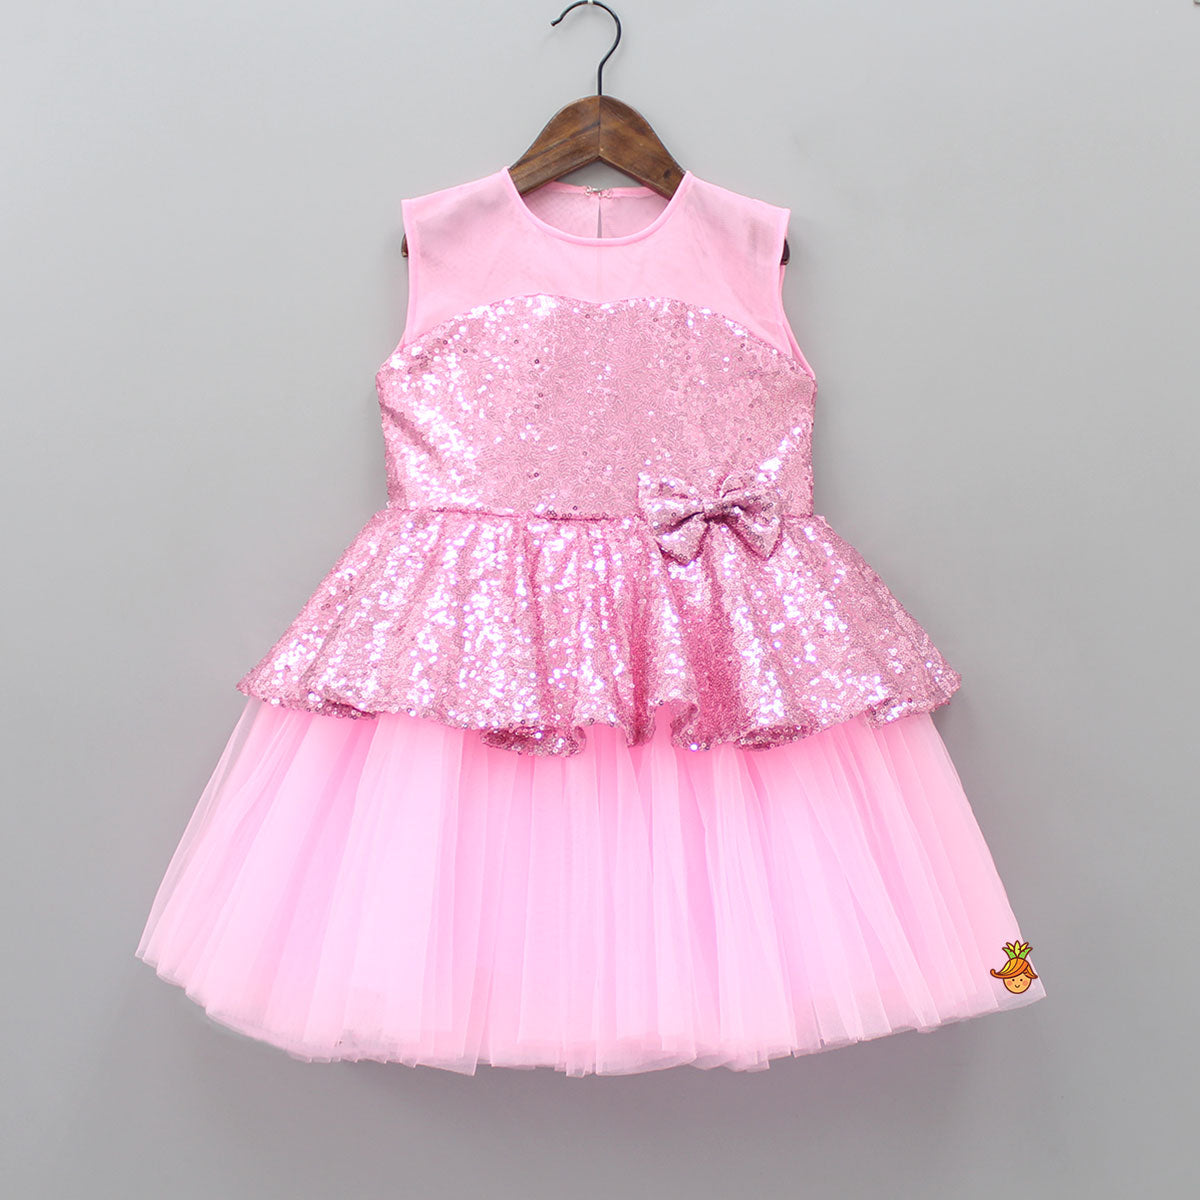 Pink Sequin Party Wear Dress With Hairclip